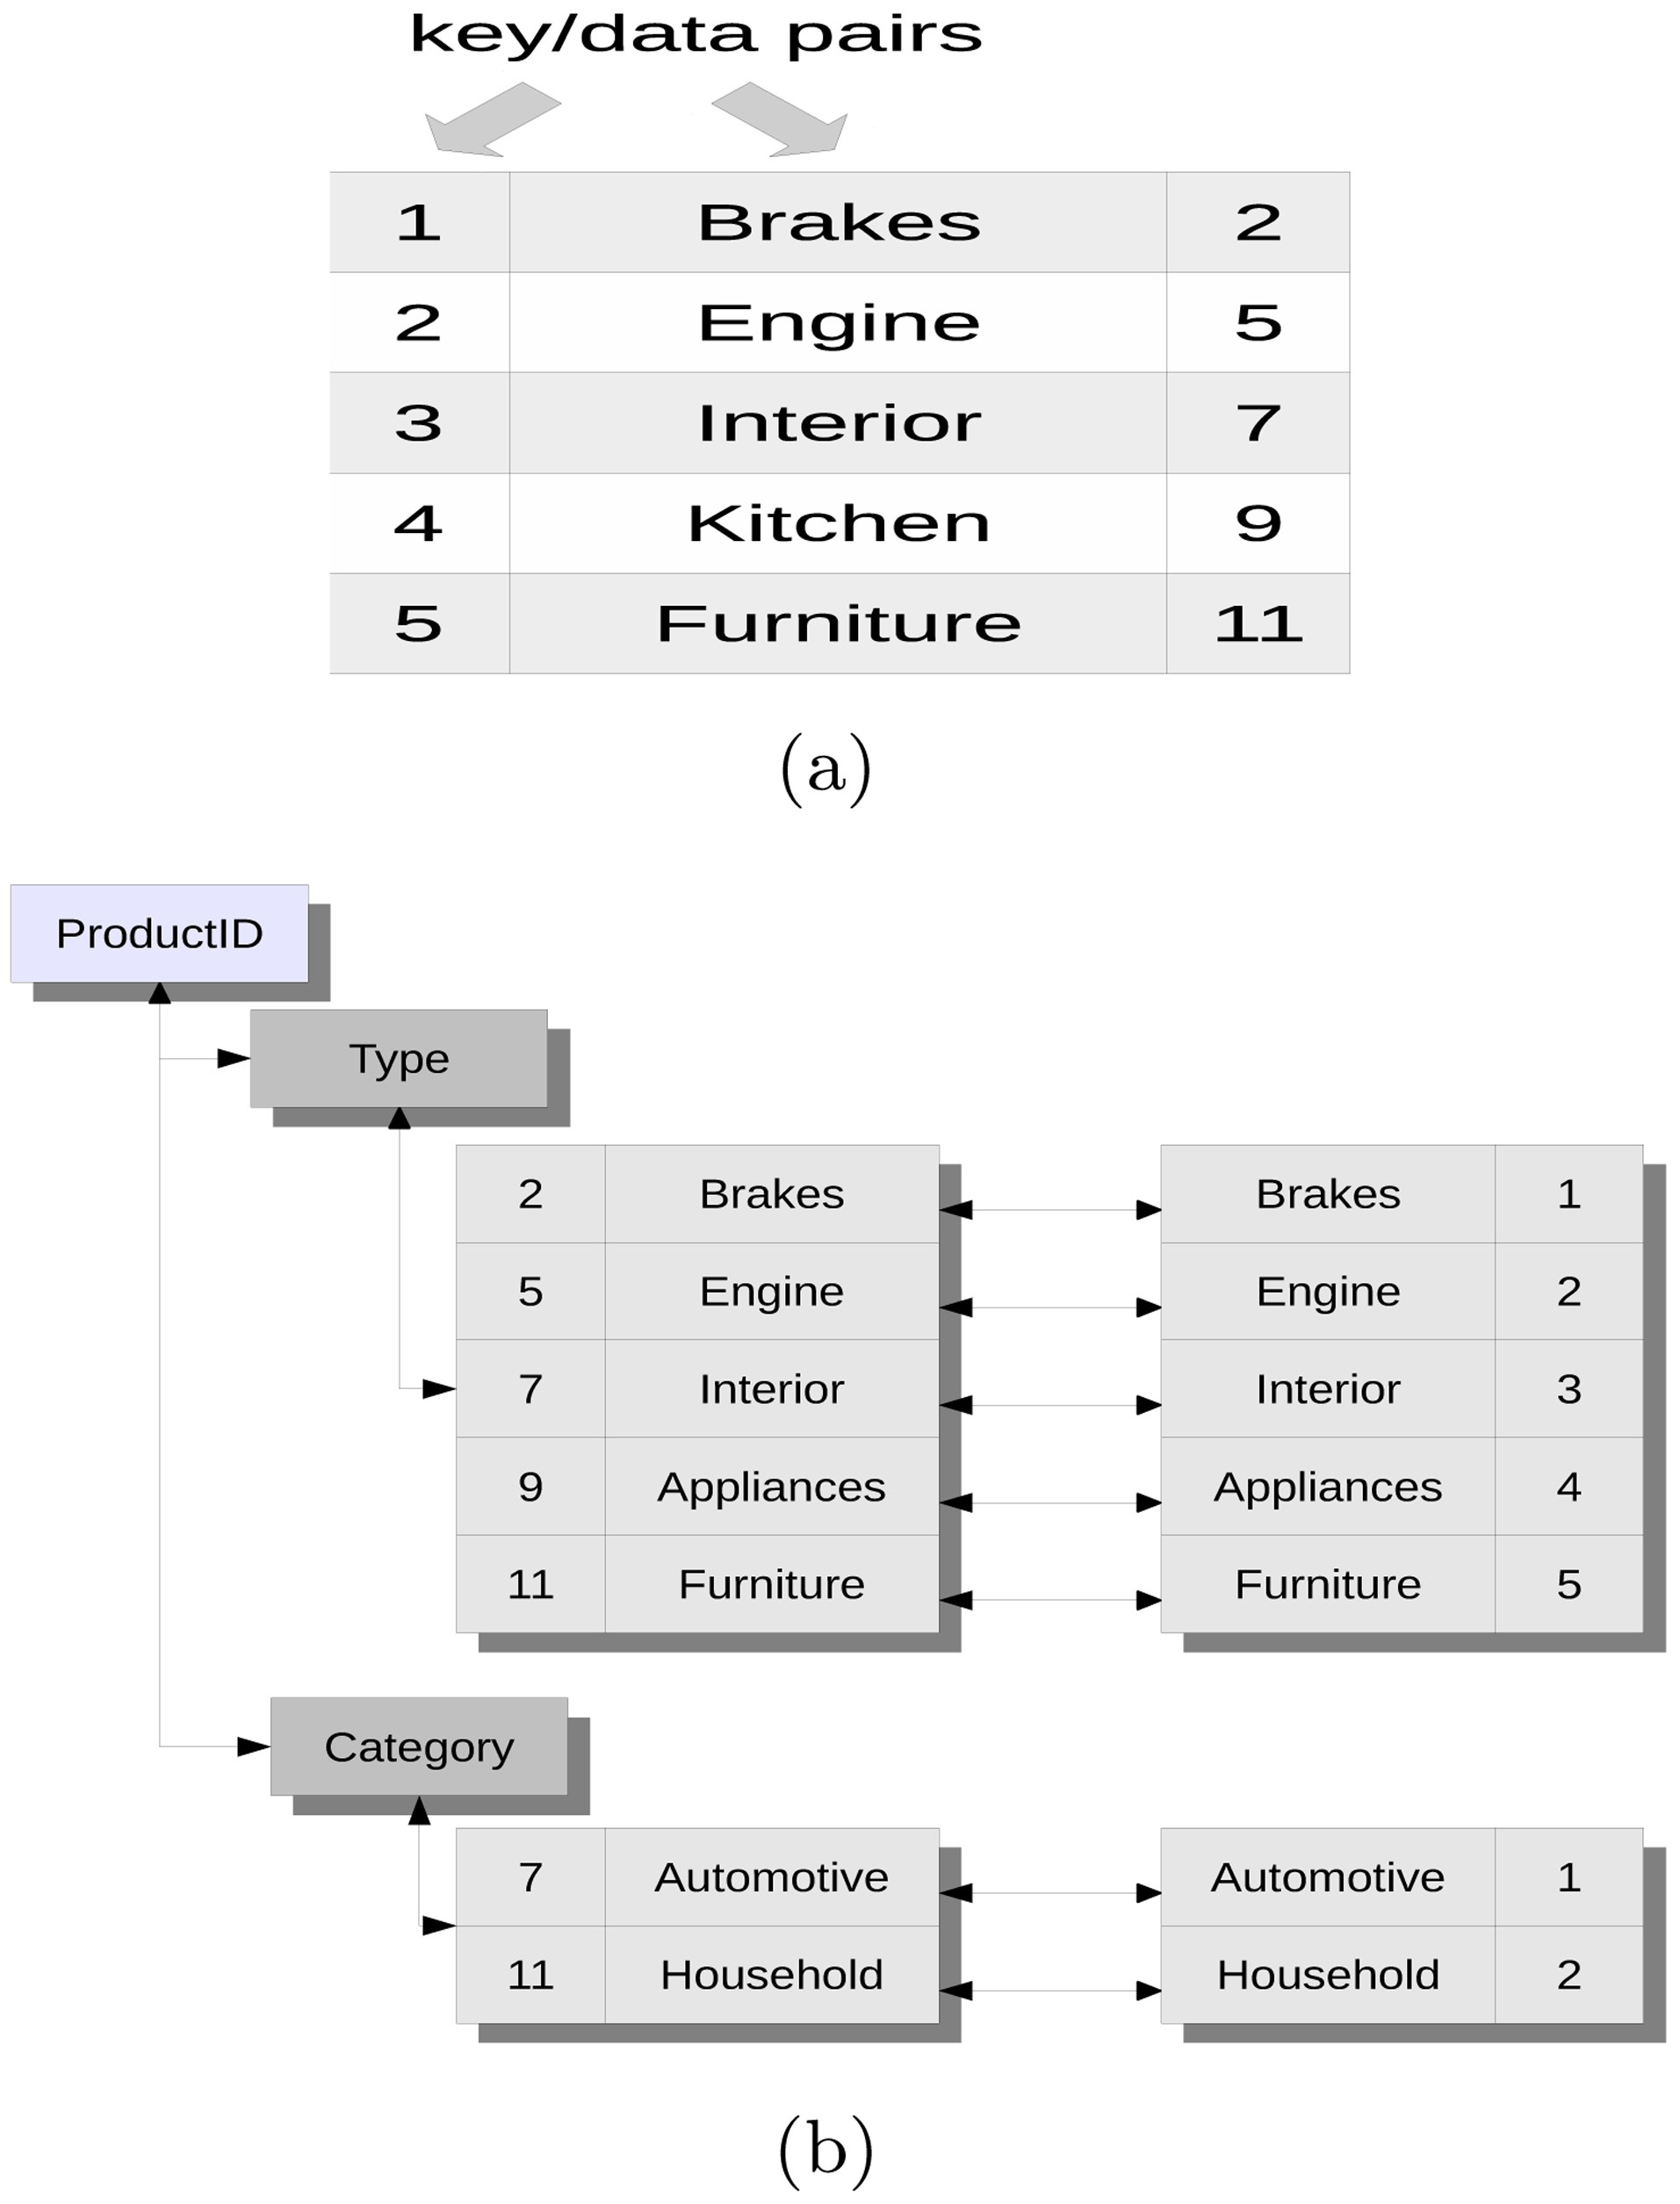 (a) Berkeley Recno database for the Type attribute, (b) Product mapGraph.